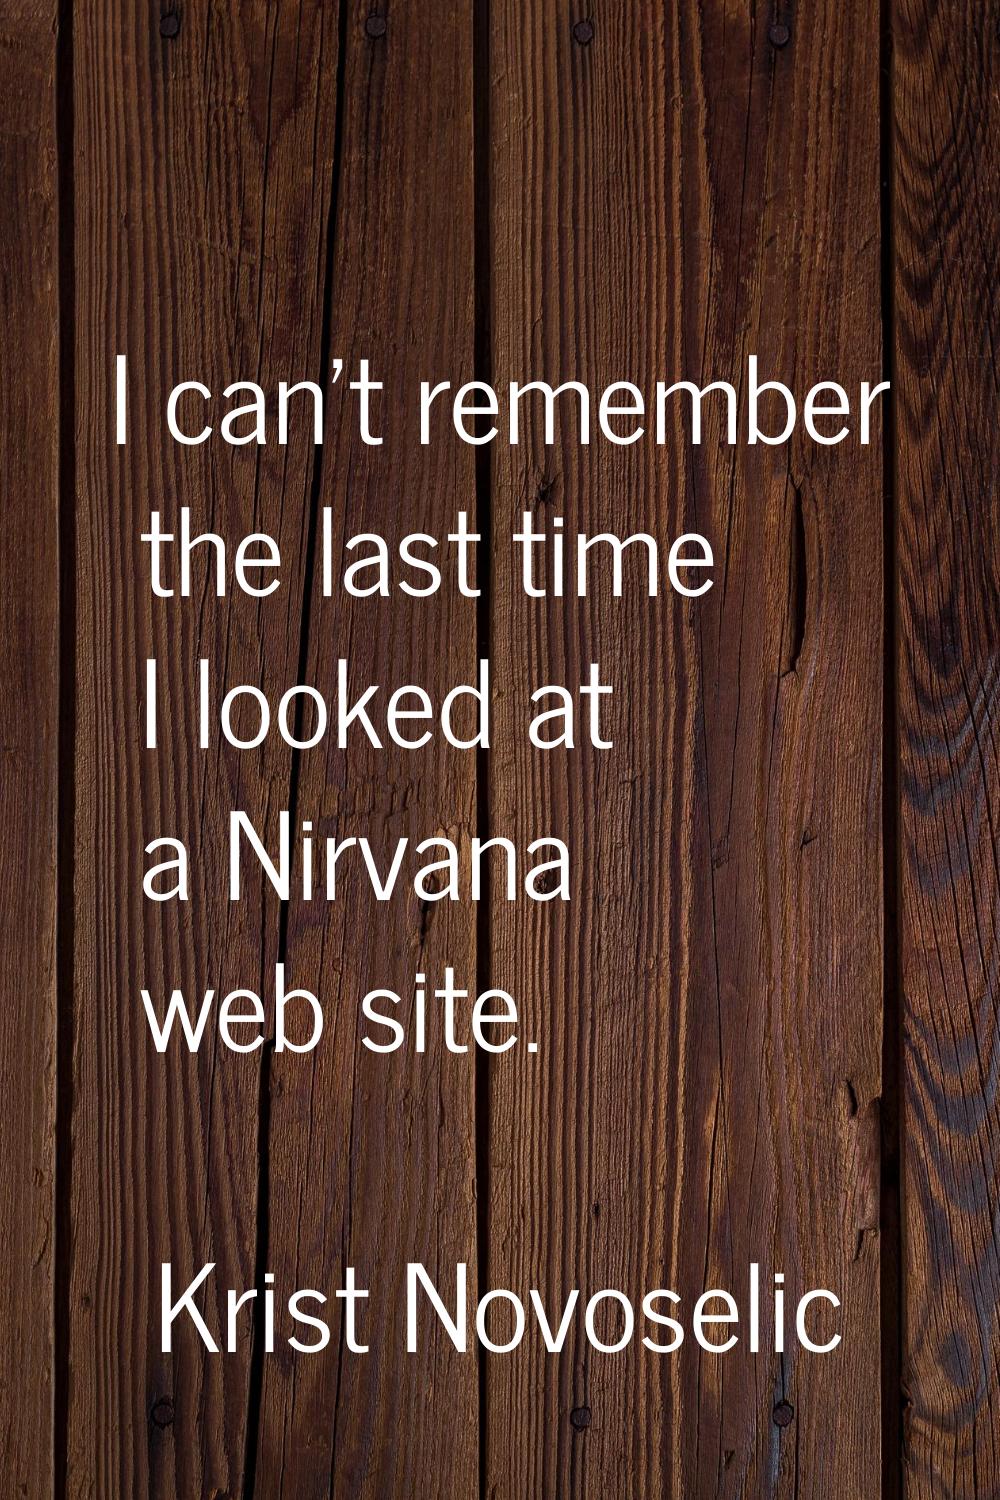 I can't remember the last time I looked at a Nirvana web site.